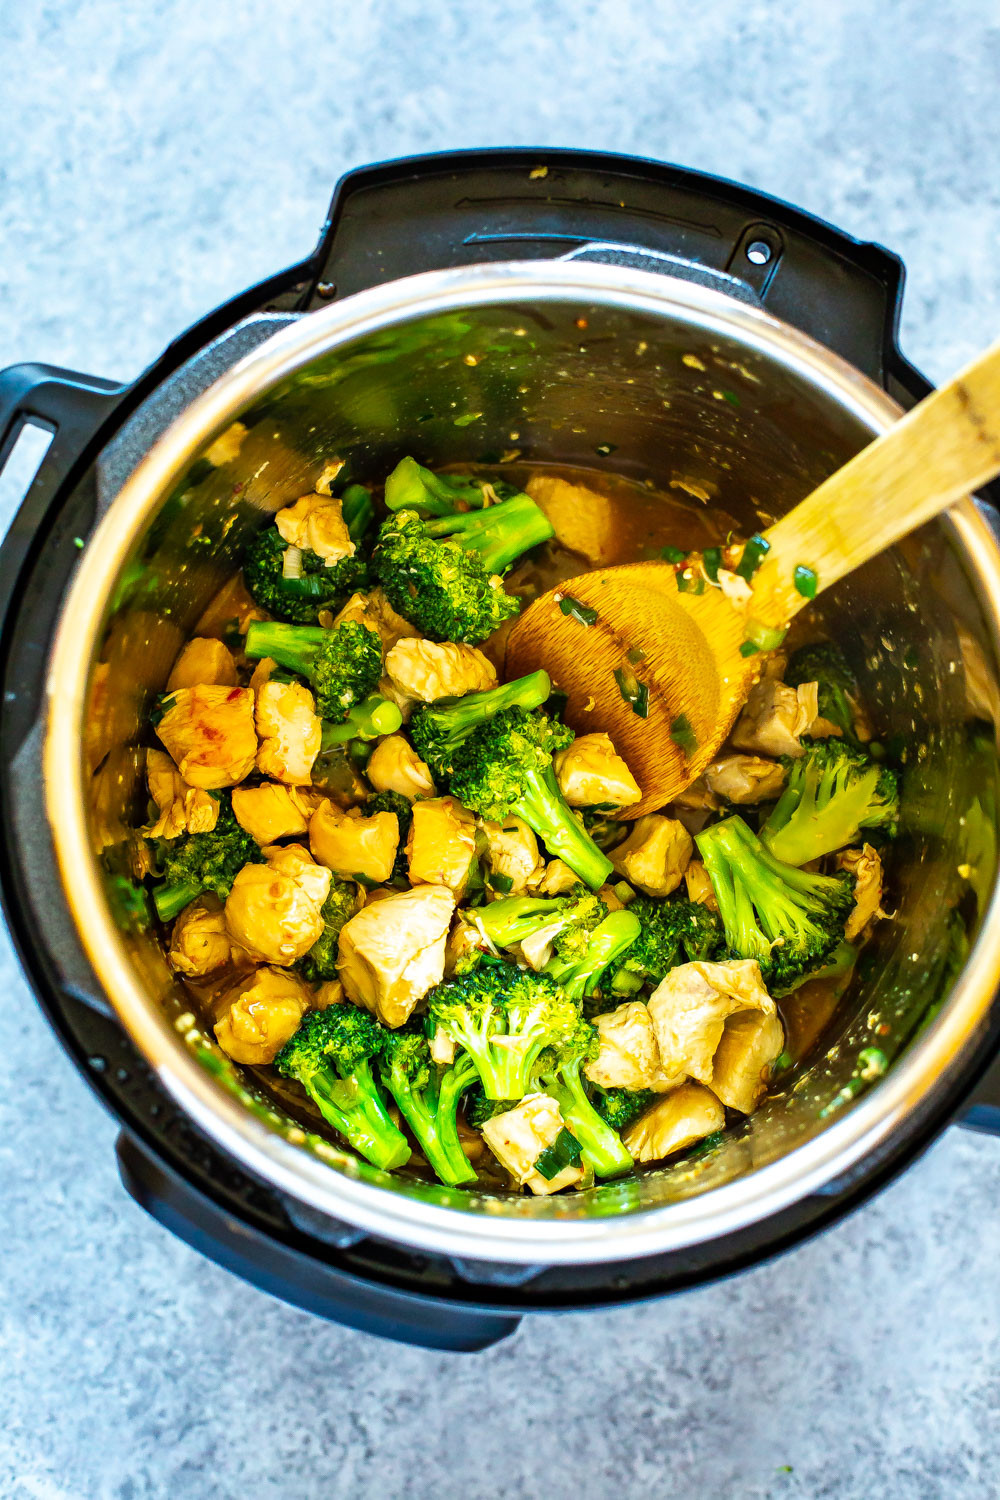 Broccoli In Instant Pot
 Instant Pot Chinese Chicken and Broccoli Eating Instantly